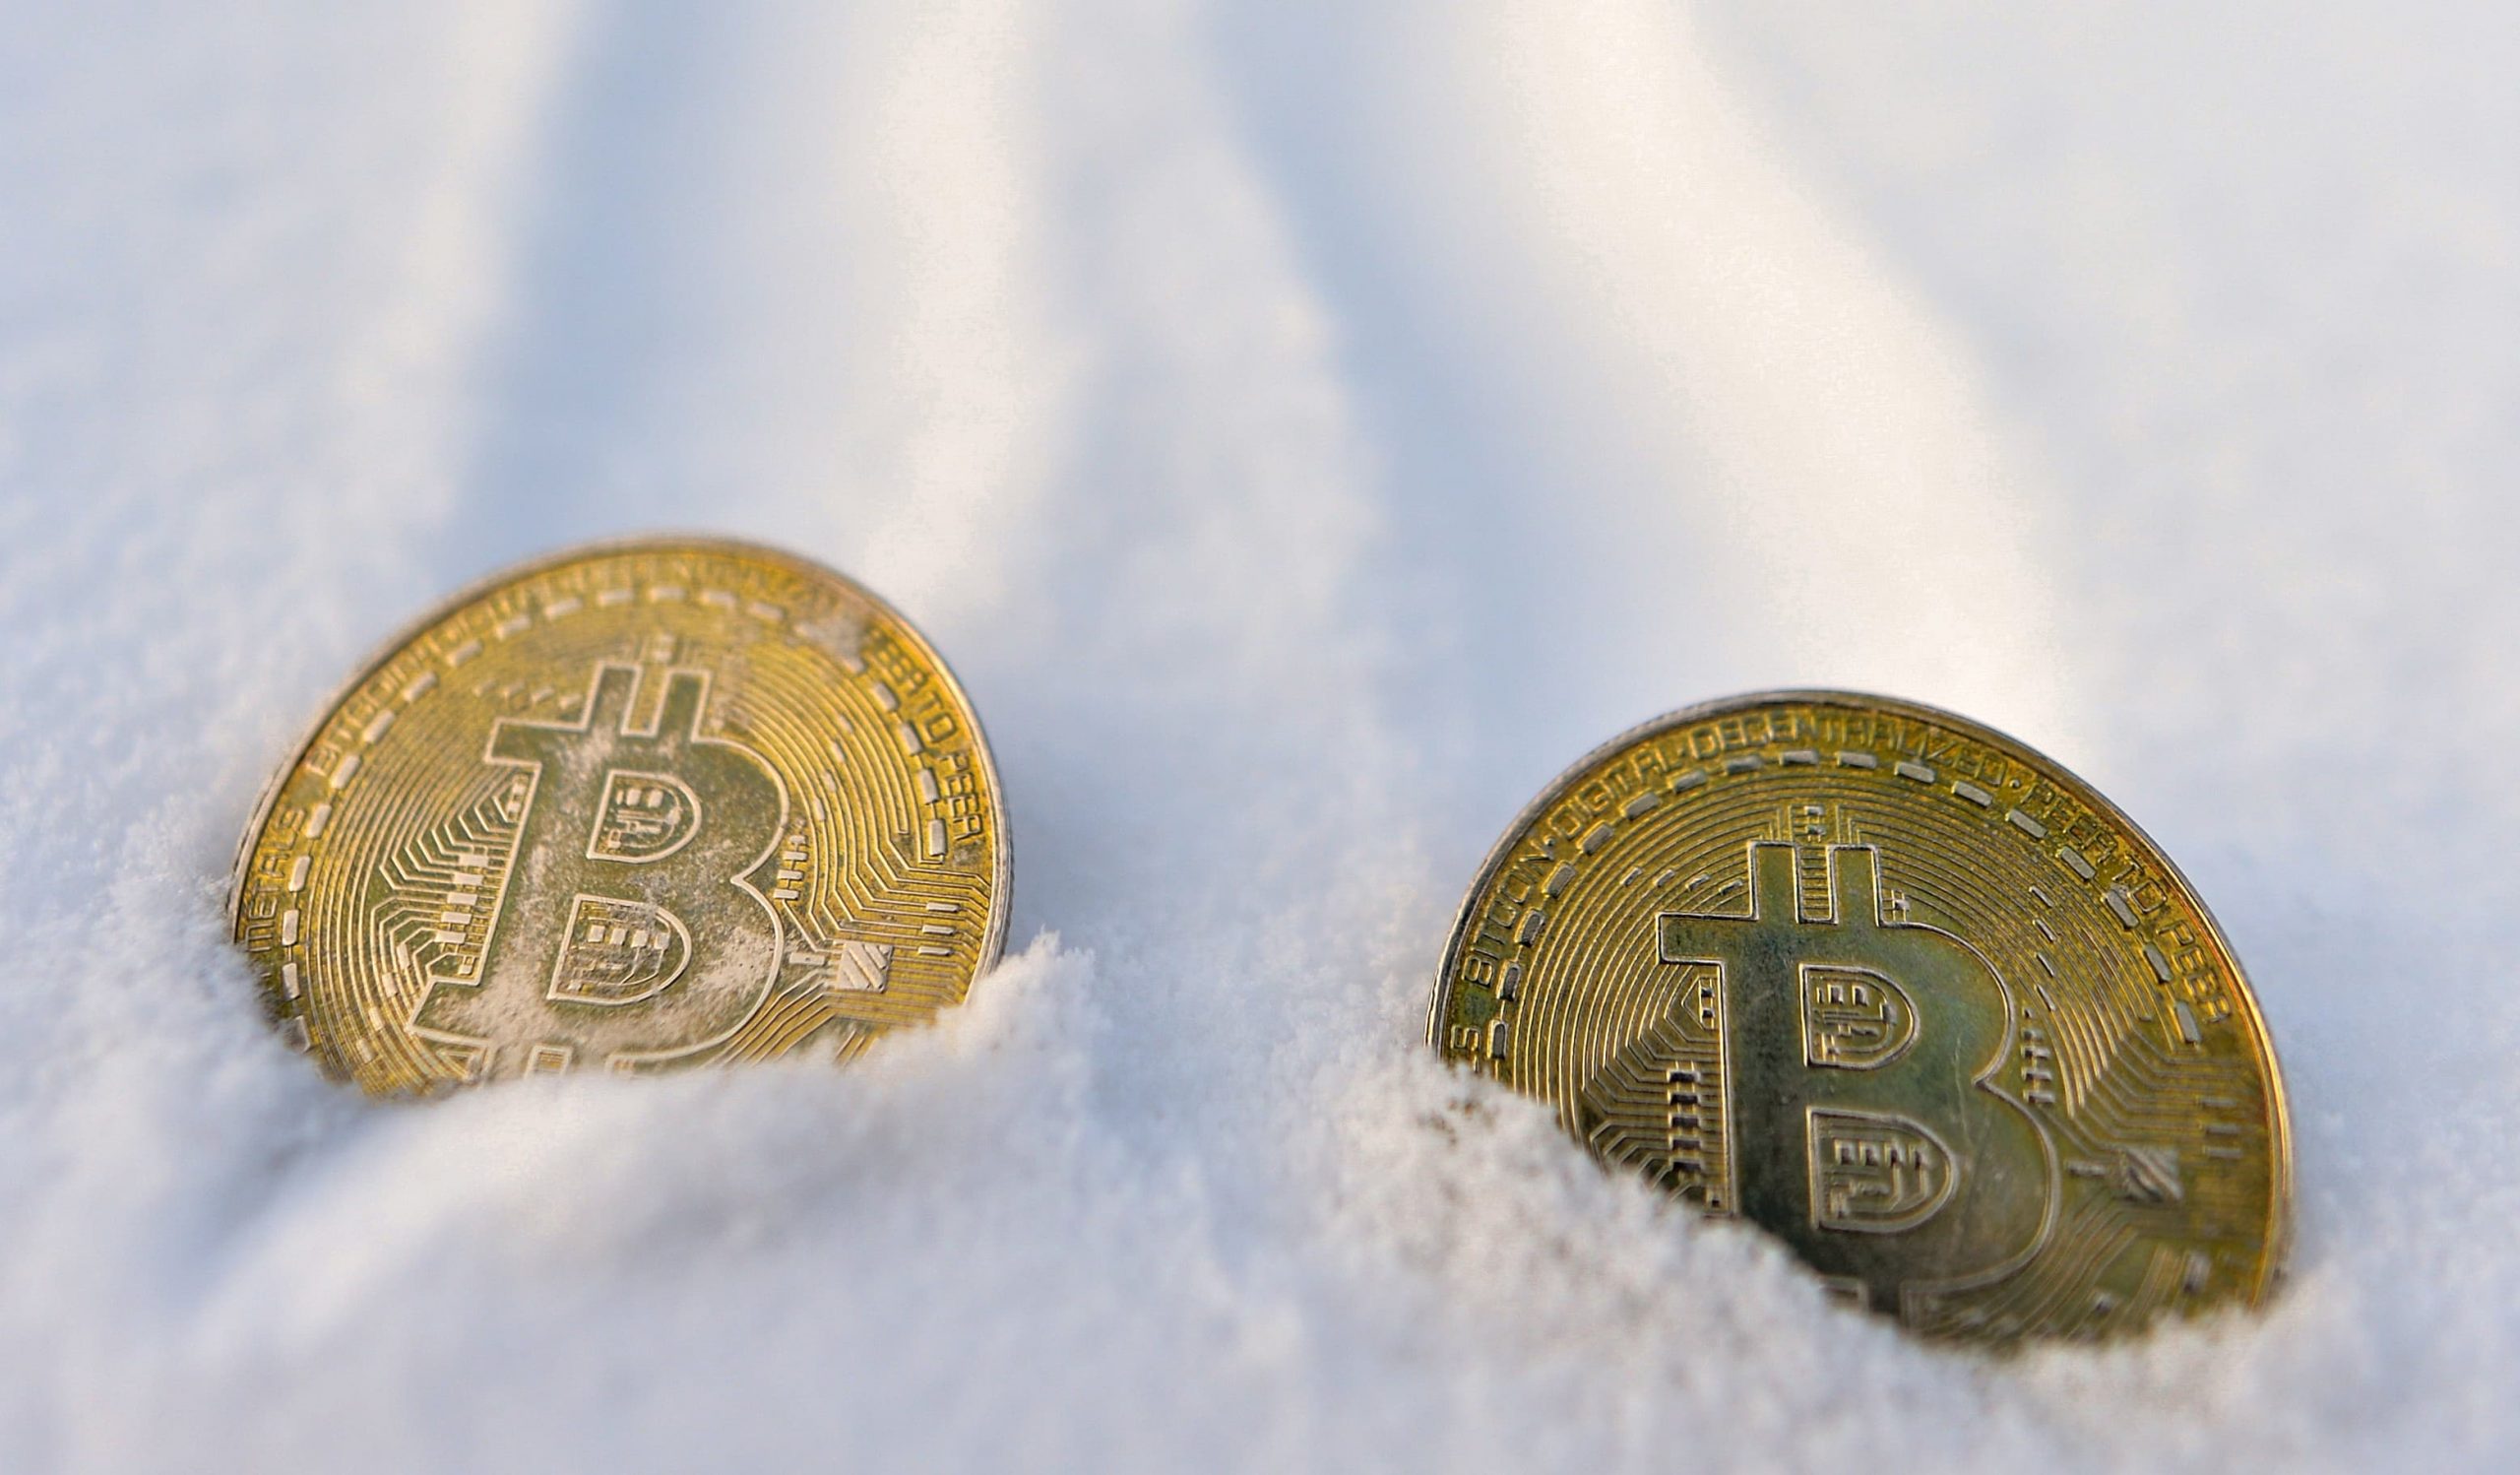 Here’s the outlook for bitcoin as geopolitical tensions heat up and interest rates rise